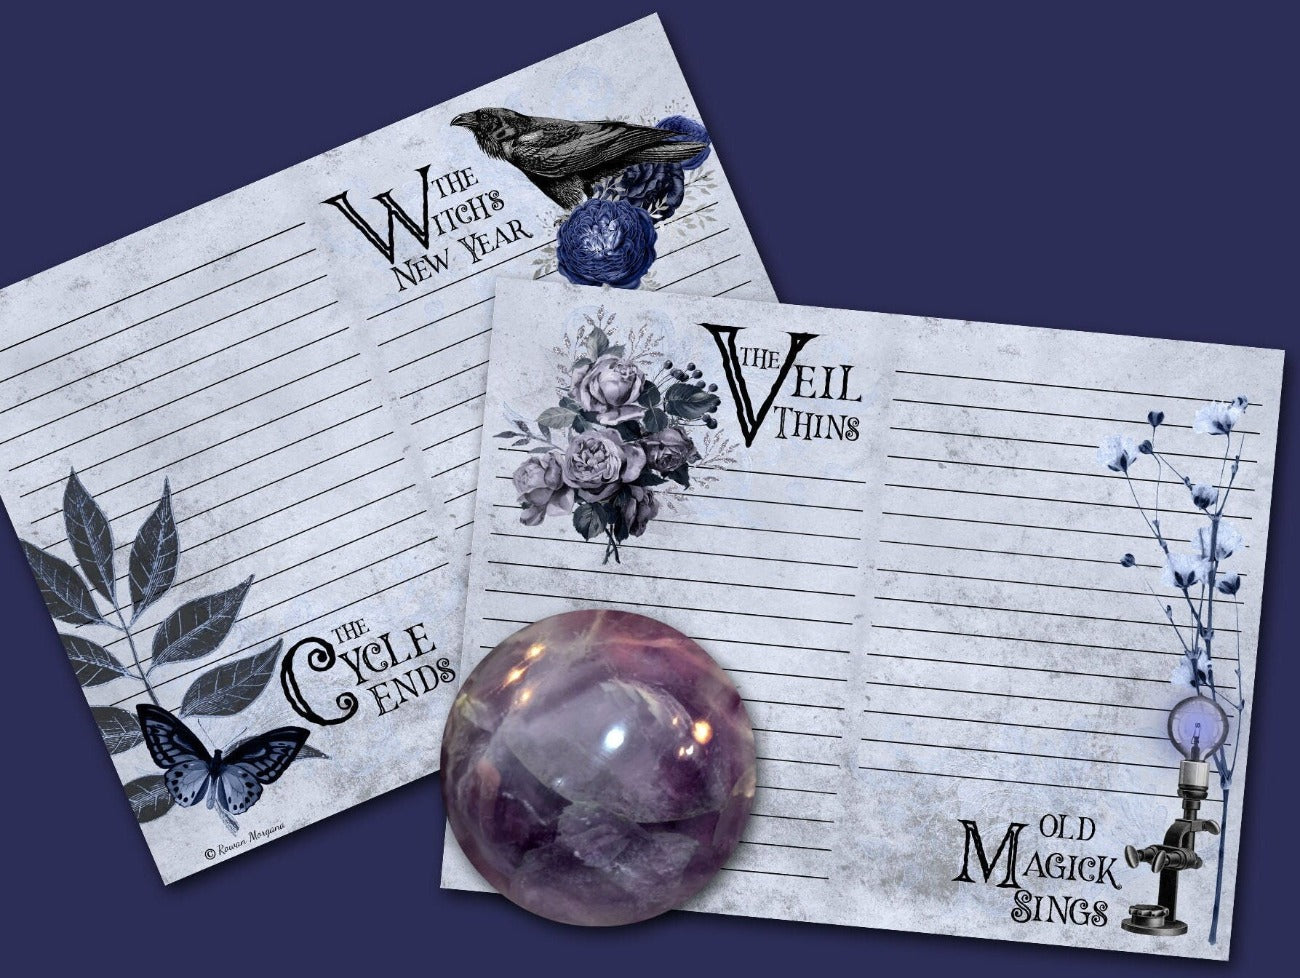 The Cycle Ends, Witches New Year, Veil Thins, Old Magick Sings - SAMHAIN JUNK JOURNAL Kit Printable Pages - Morgana Magick Spell